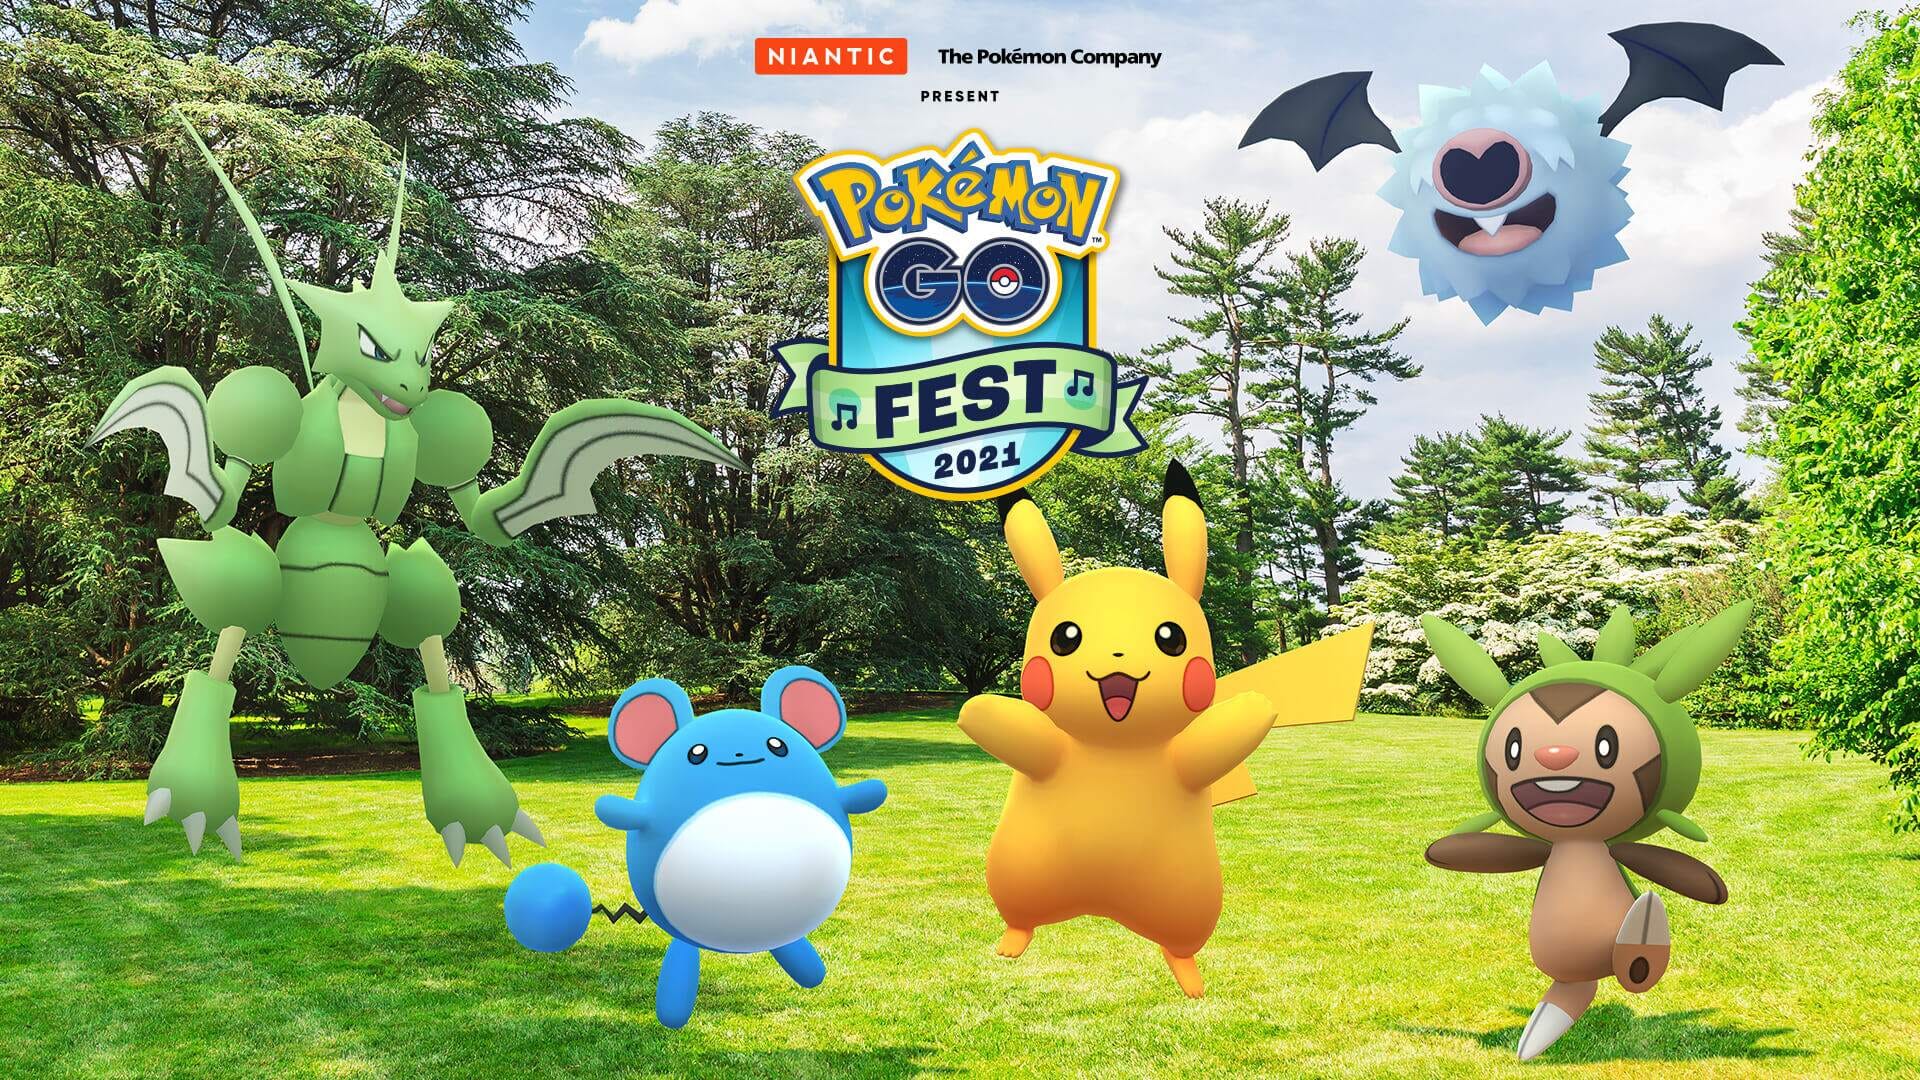 Scyther, Marill, Pikachu, and Chespin fronting this year's Pokemon Go Fest